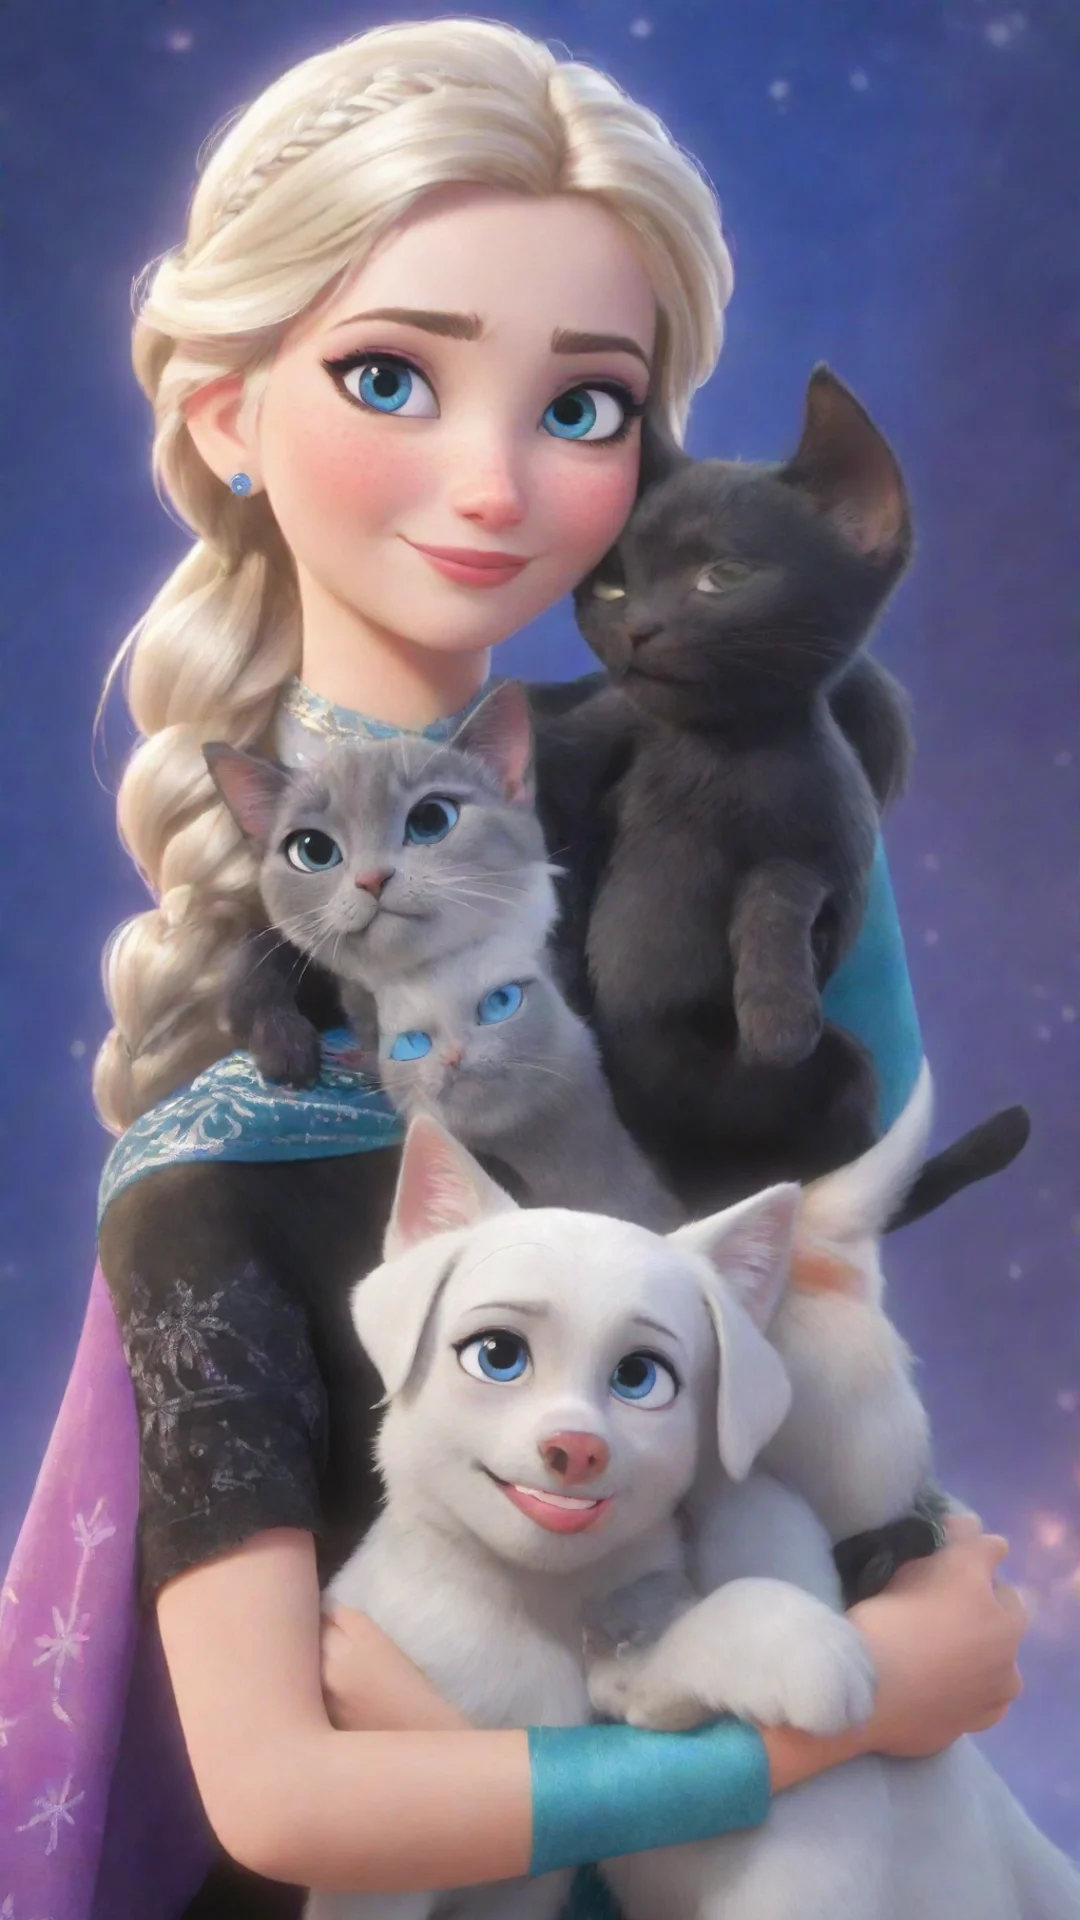 aiartstation art elsa and anna frozen saree indian hugs with her dog beagle and cat noir black together smile  confident engaging wow 3 tall